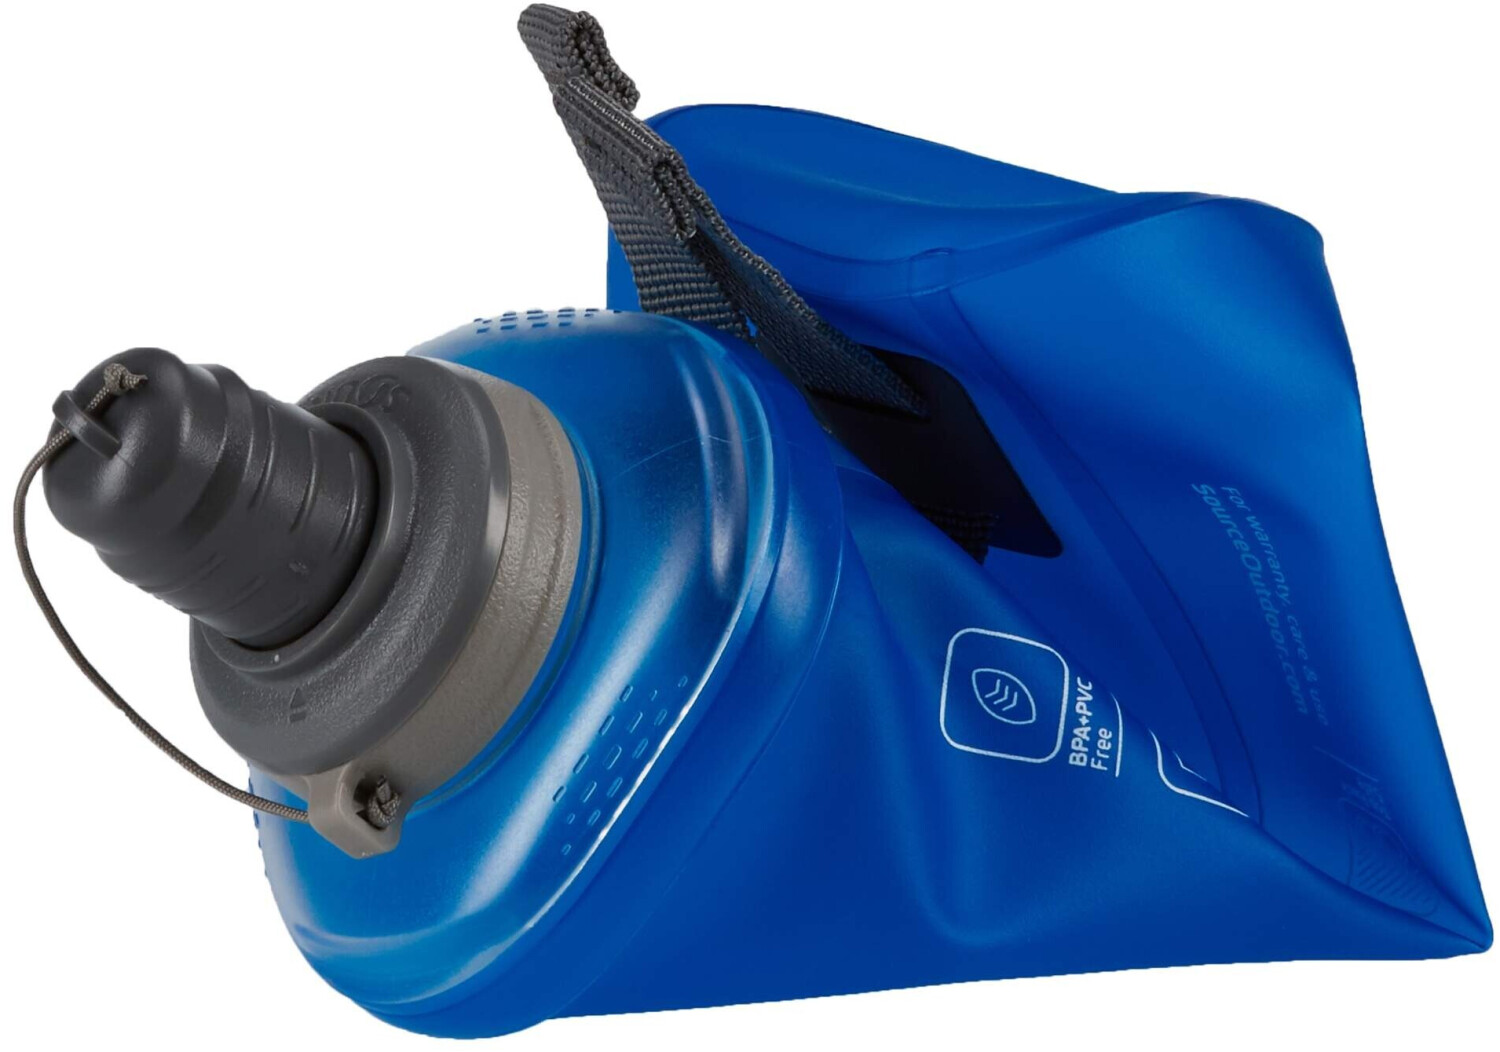 Source Nomadic faltbare Trinkflasche 1L blue ab 20,95 €